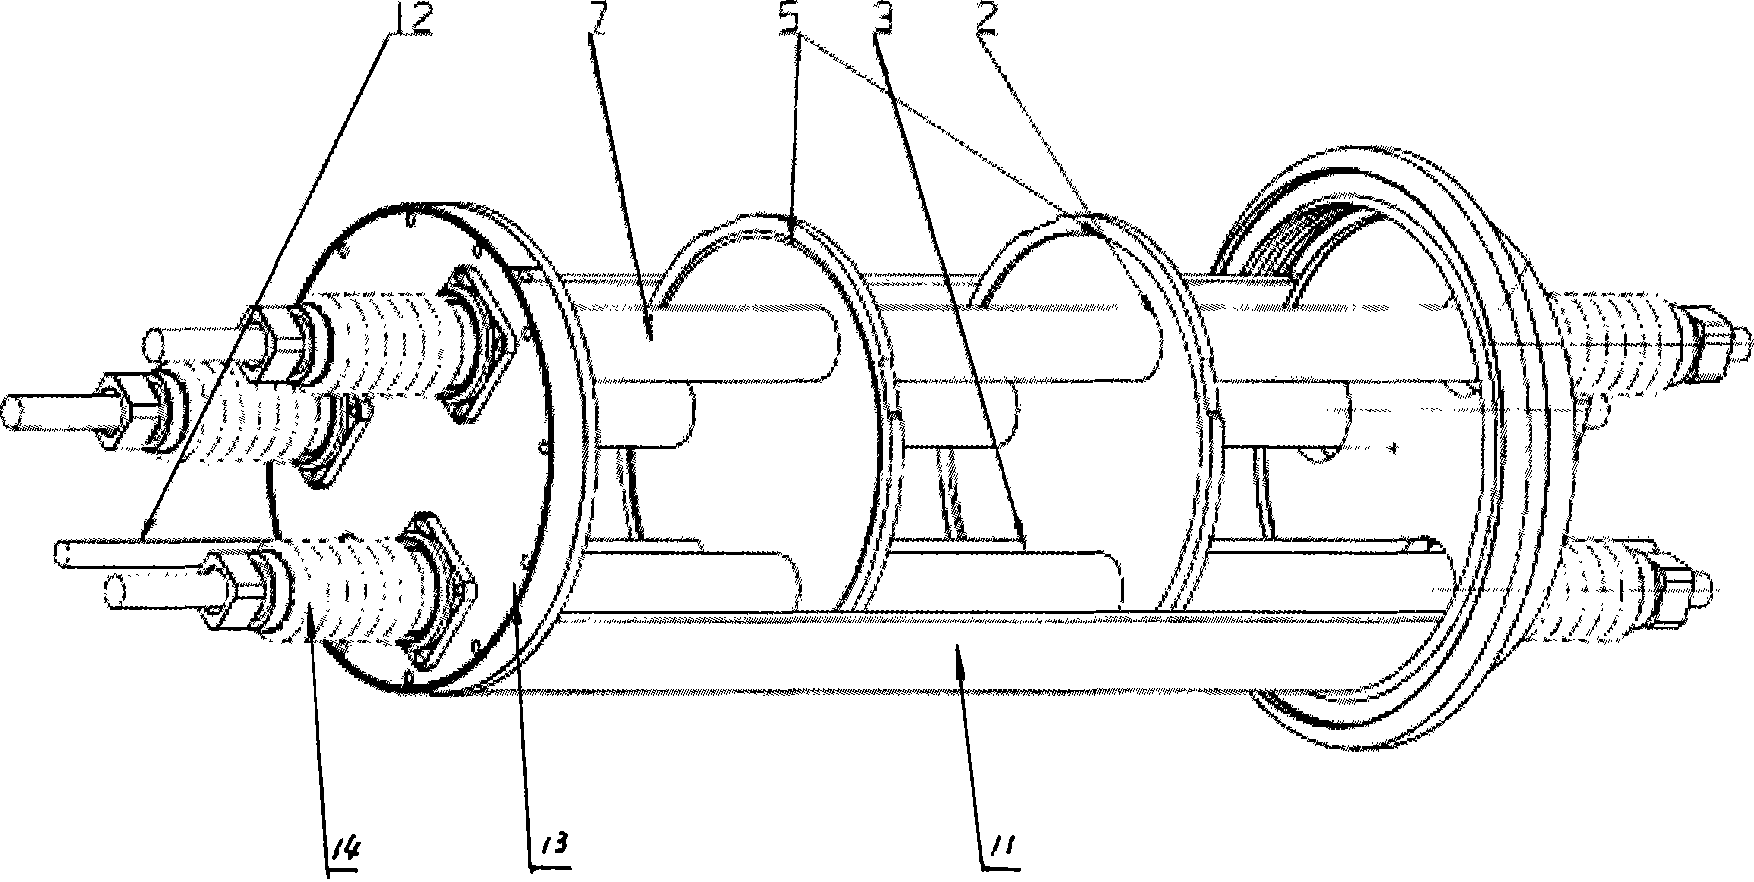 Electric penetration piece with radiation shielding structure